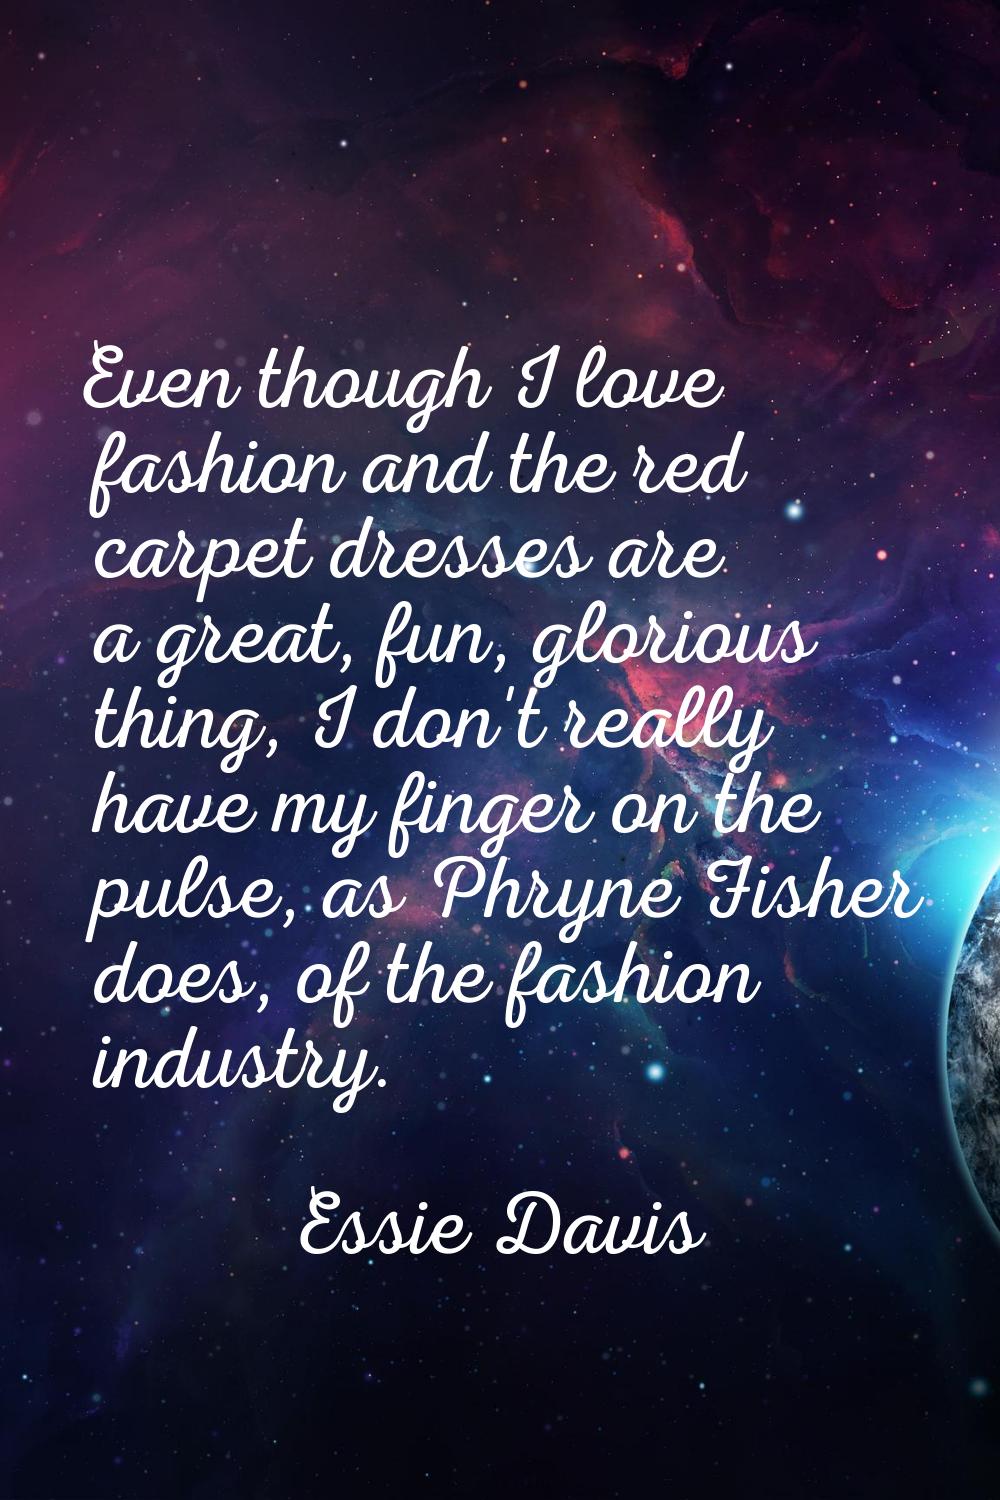 Even though I love fashion and the red carpet dresses are a great, fun, glorious thing, I don't rea